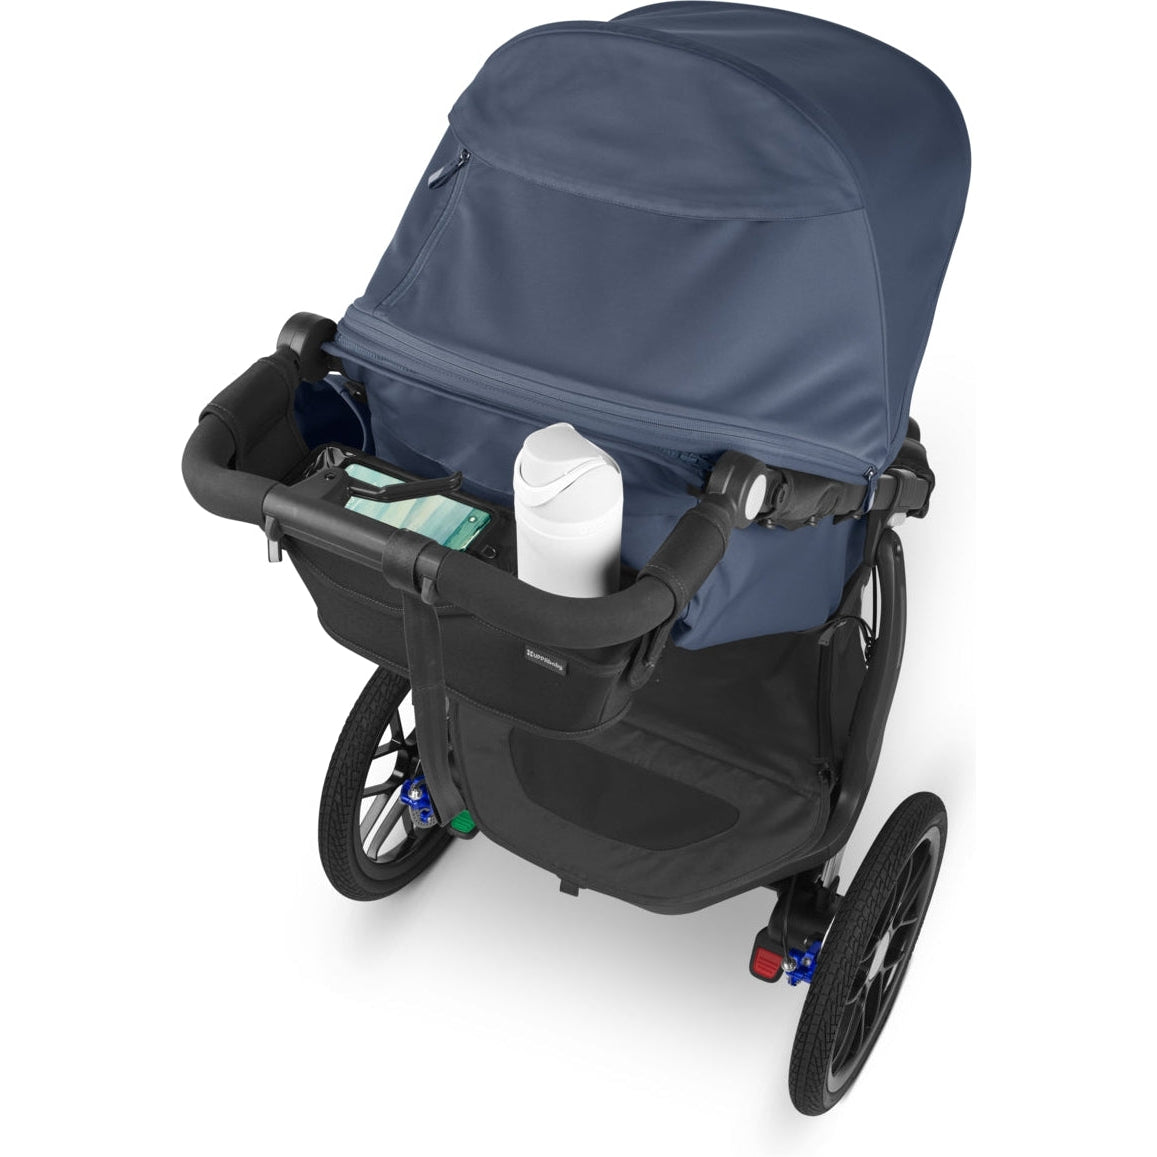 UPPAbaby Ridge Parent Console - Twinkle Twinkle Little One